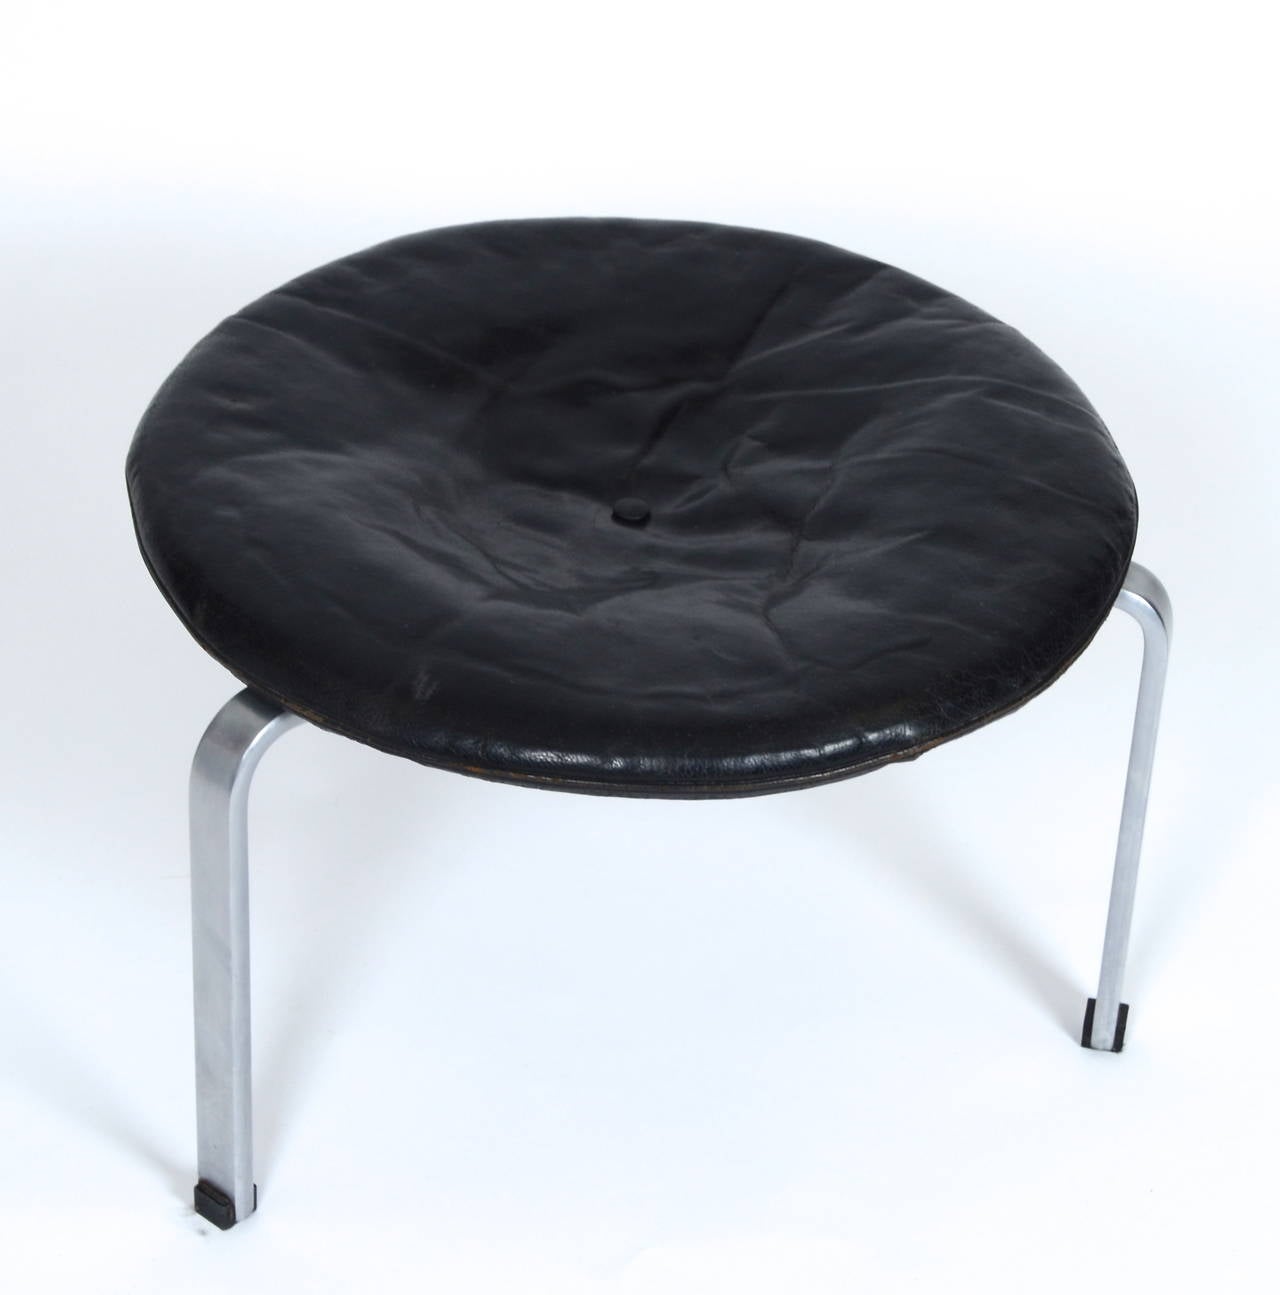 Stool model PK33 with steel frame and cushion in original black leather. 

Designed by Poul Kjærholm, 1958. Manufactured and marked E. Kold Christensen.